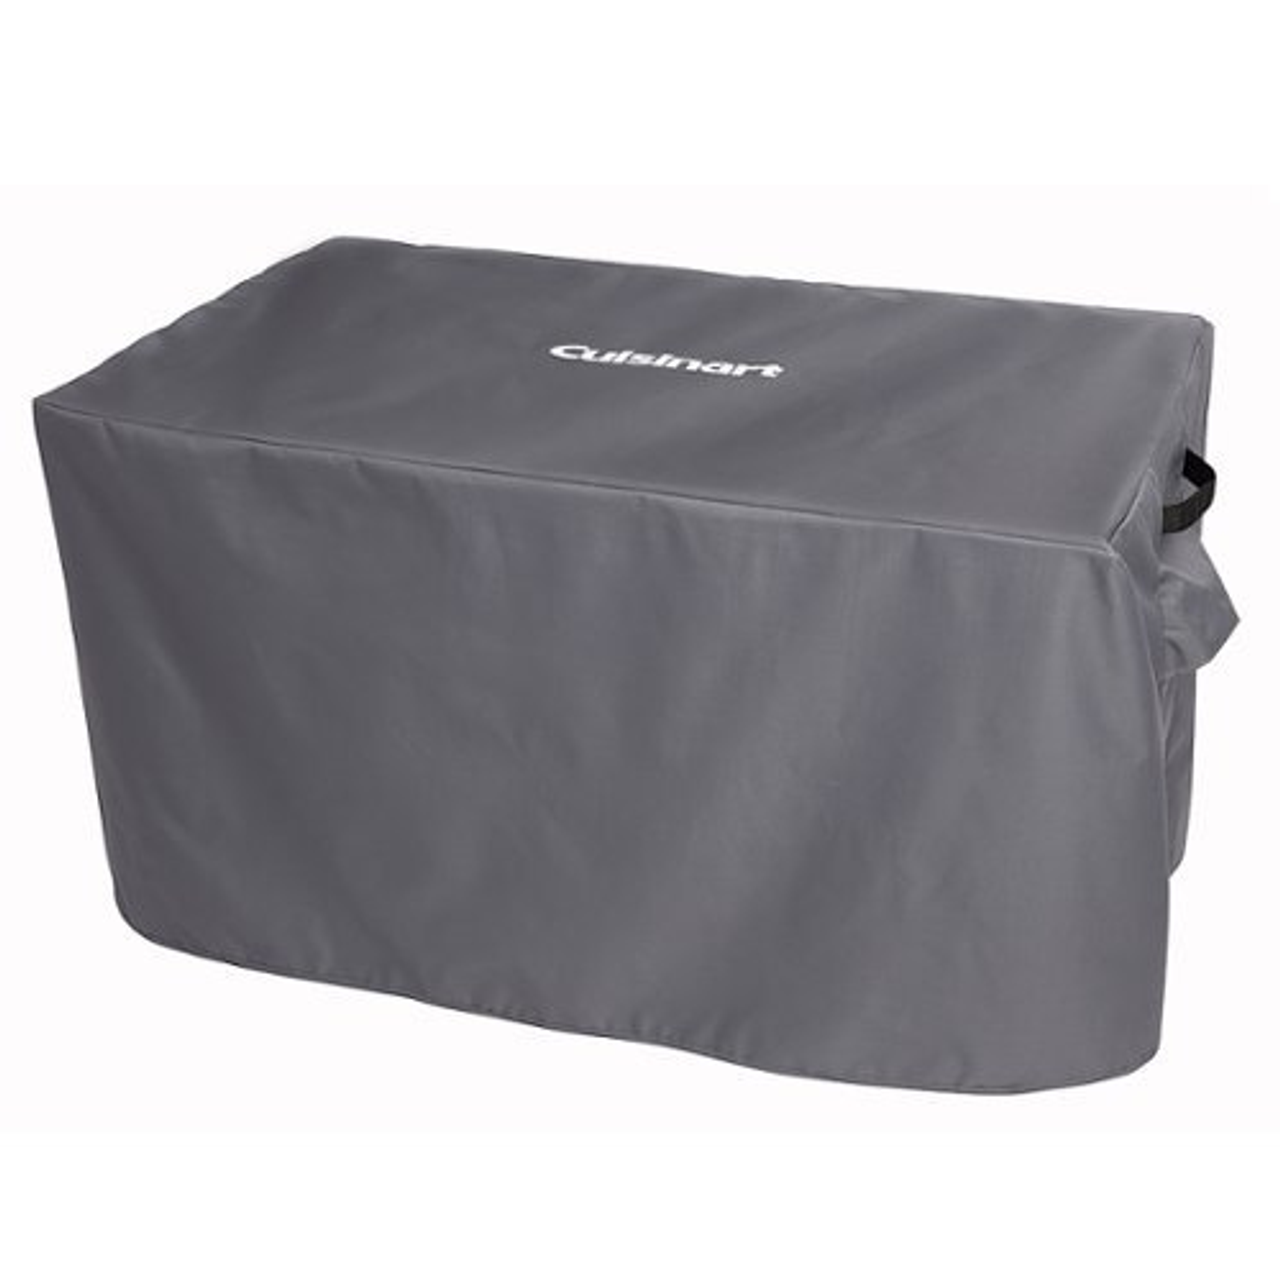 Cuisinart - Patio Fire Pit Table Cover - Black